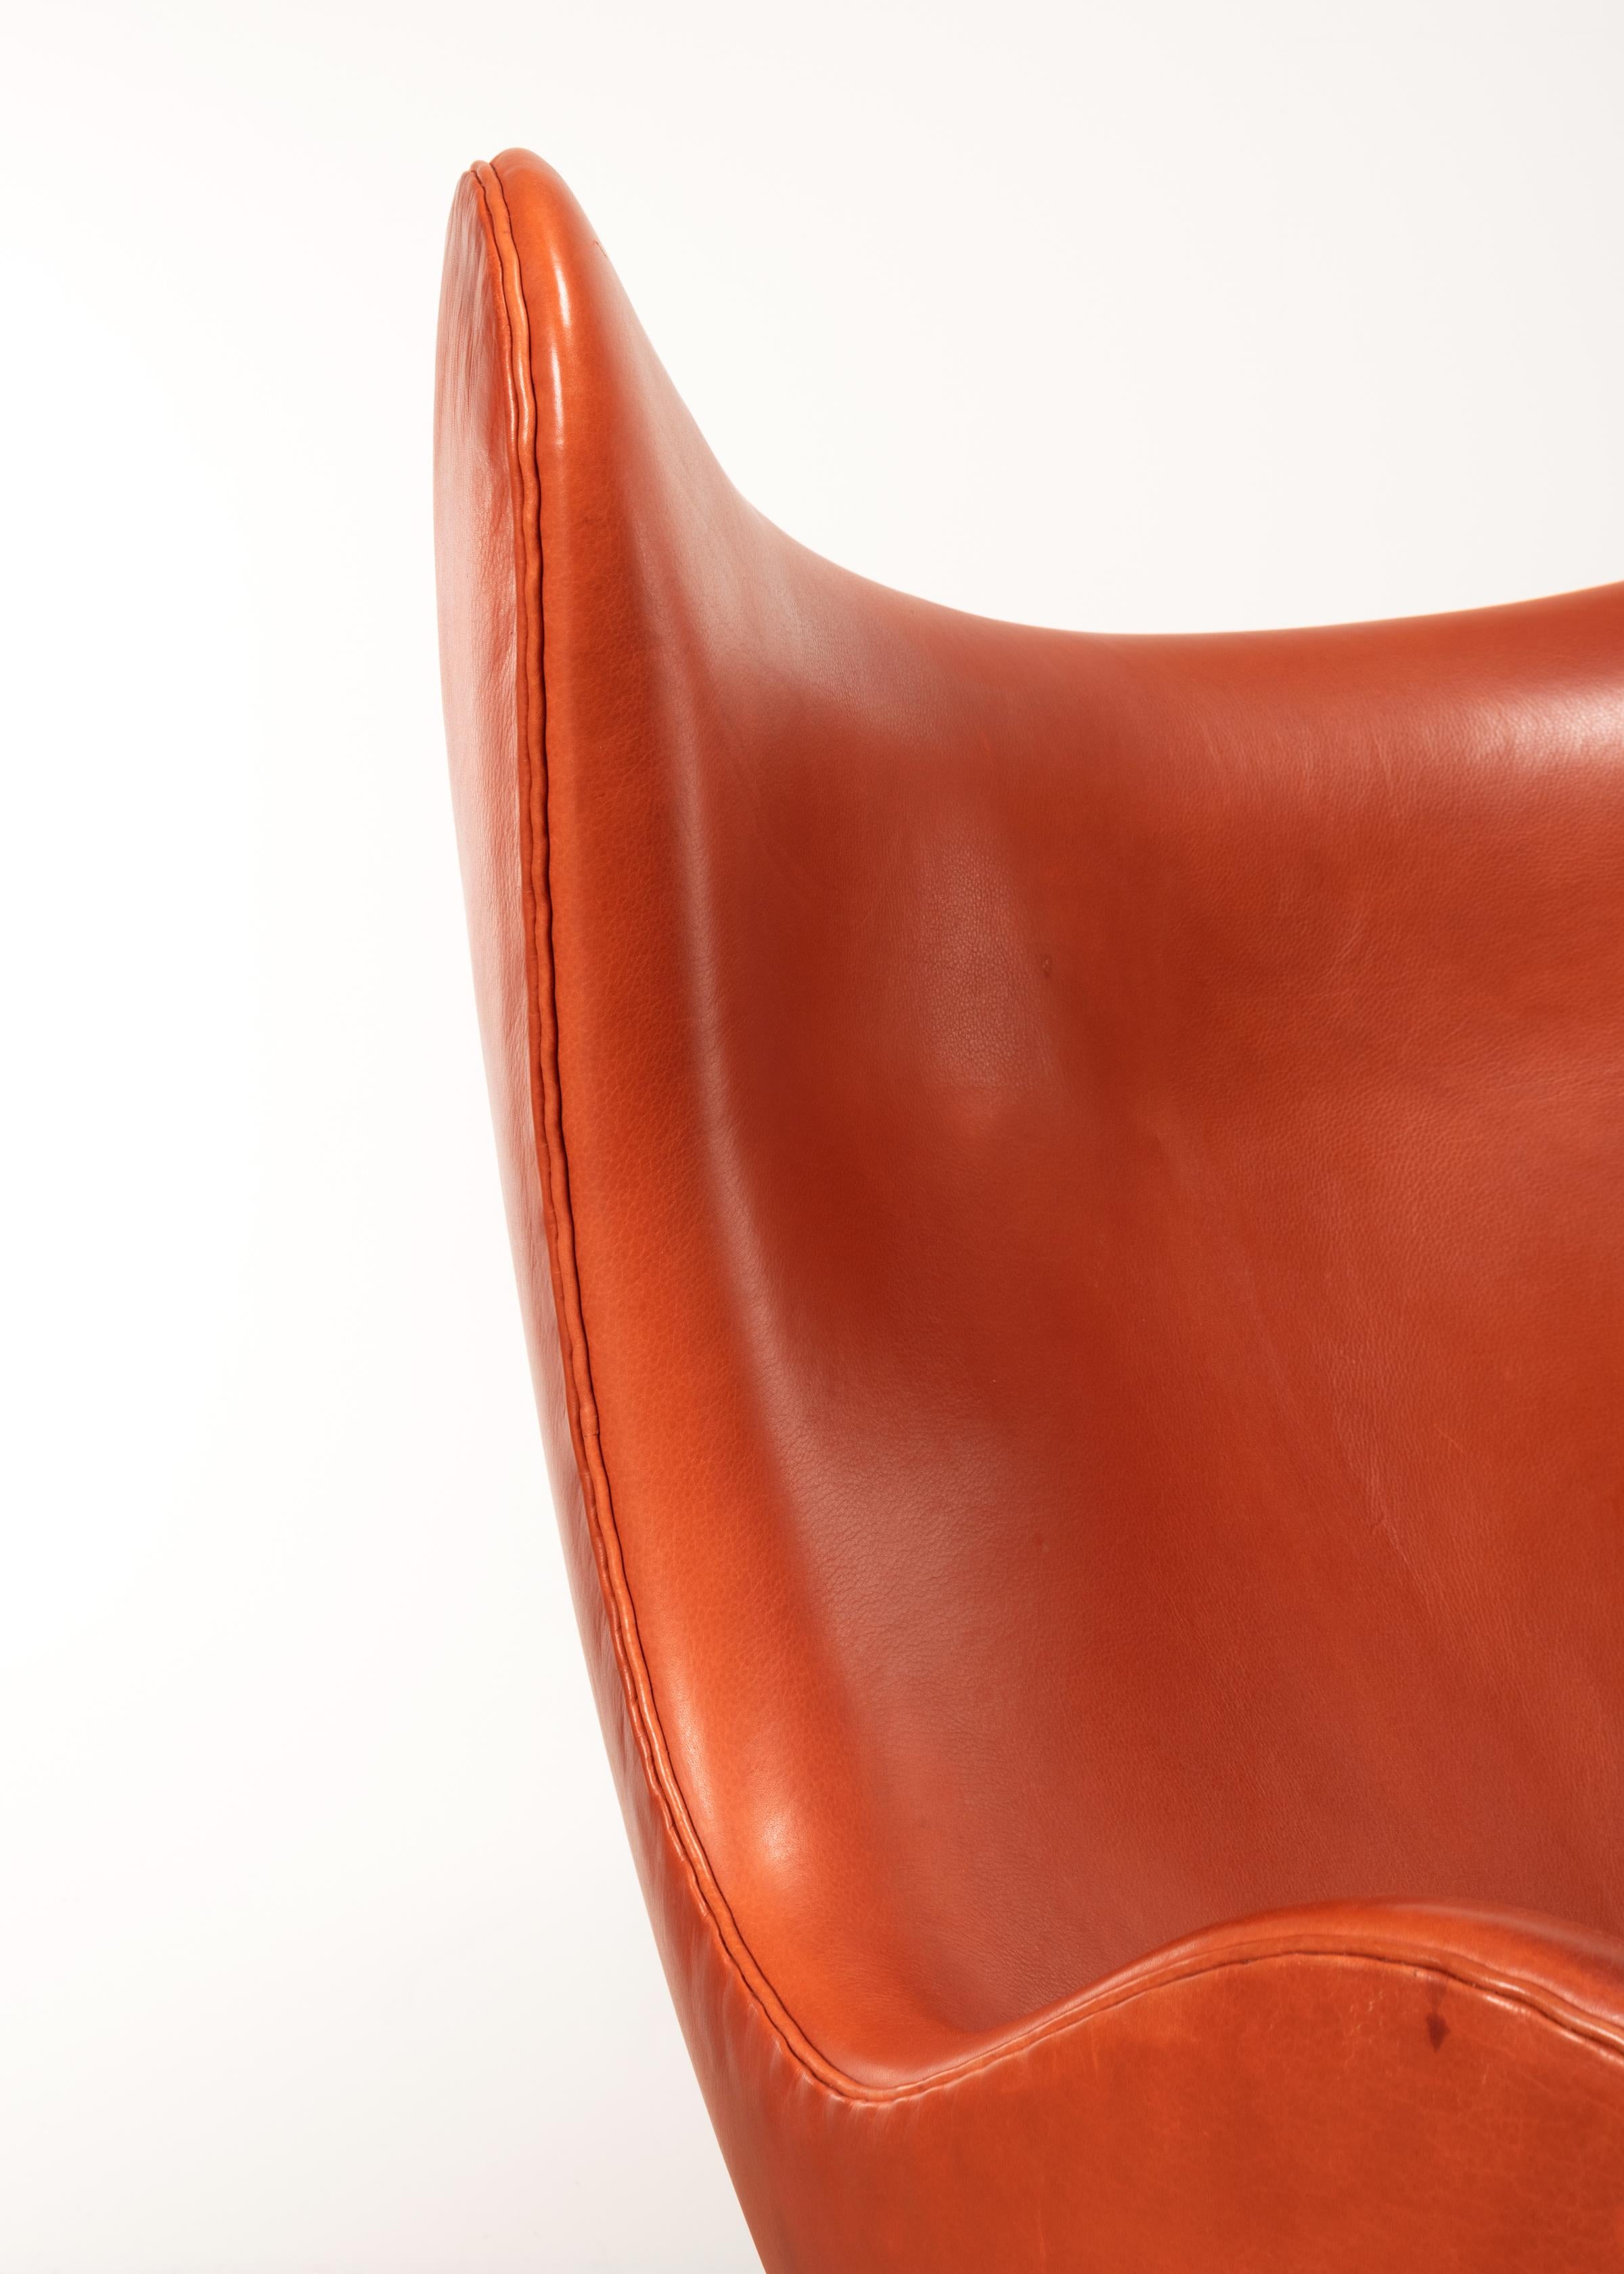 Arne Jacobsen Egg Chair in Light Patined Grace Leather by Fitz Hansen 6